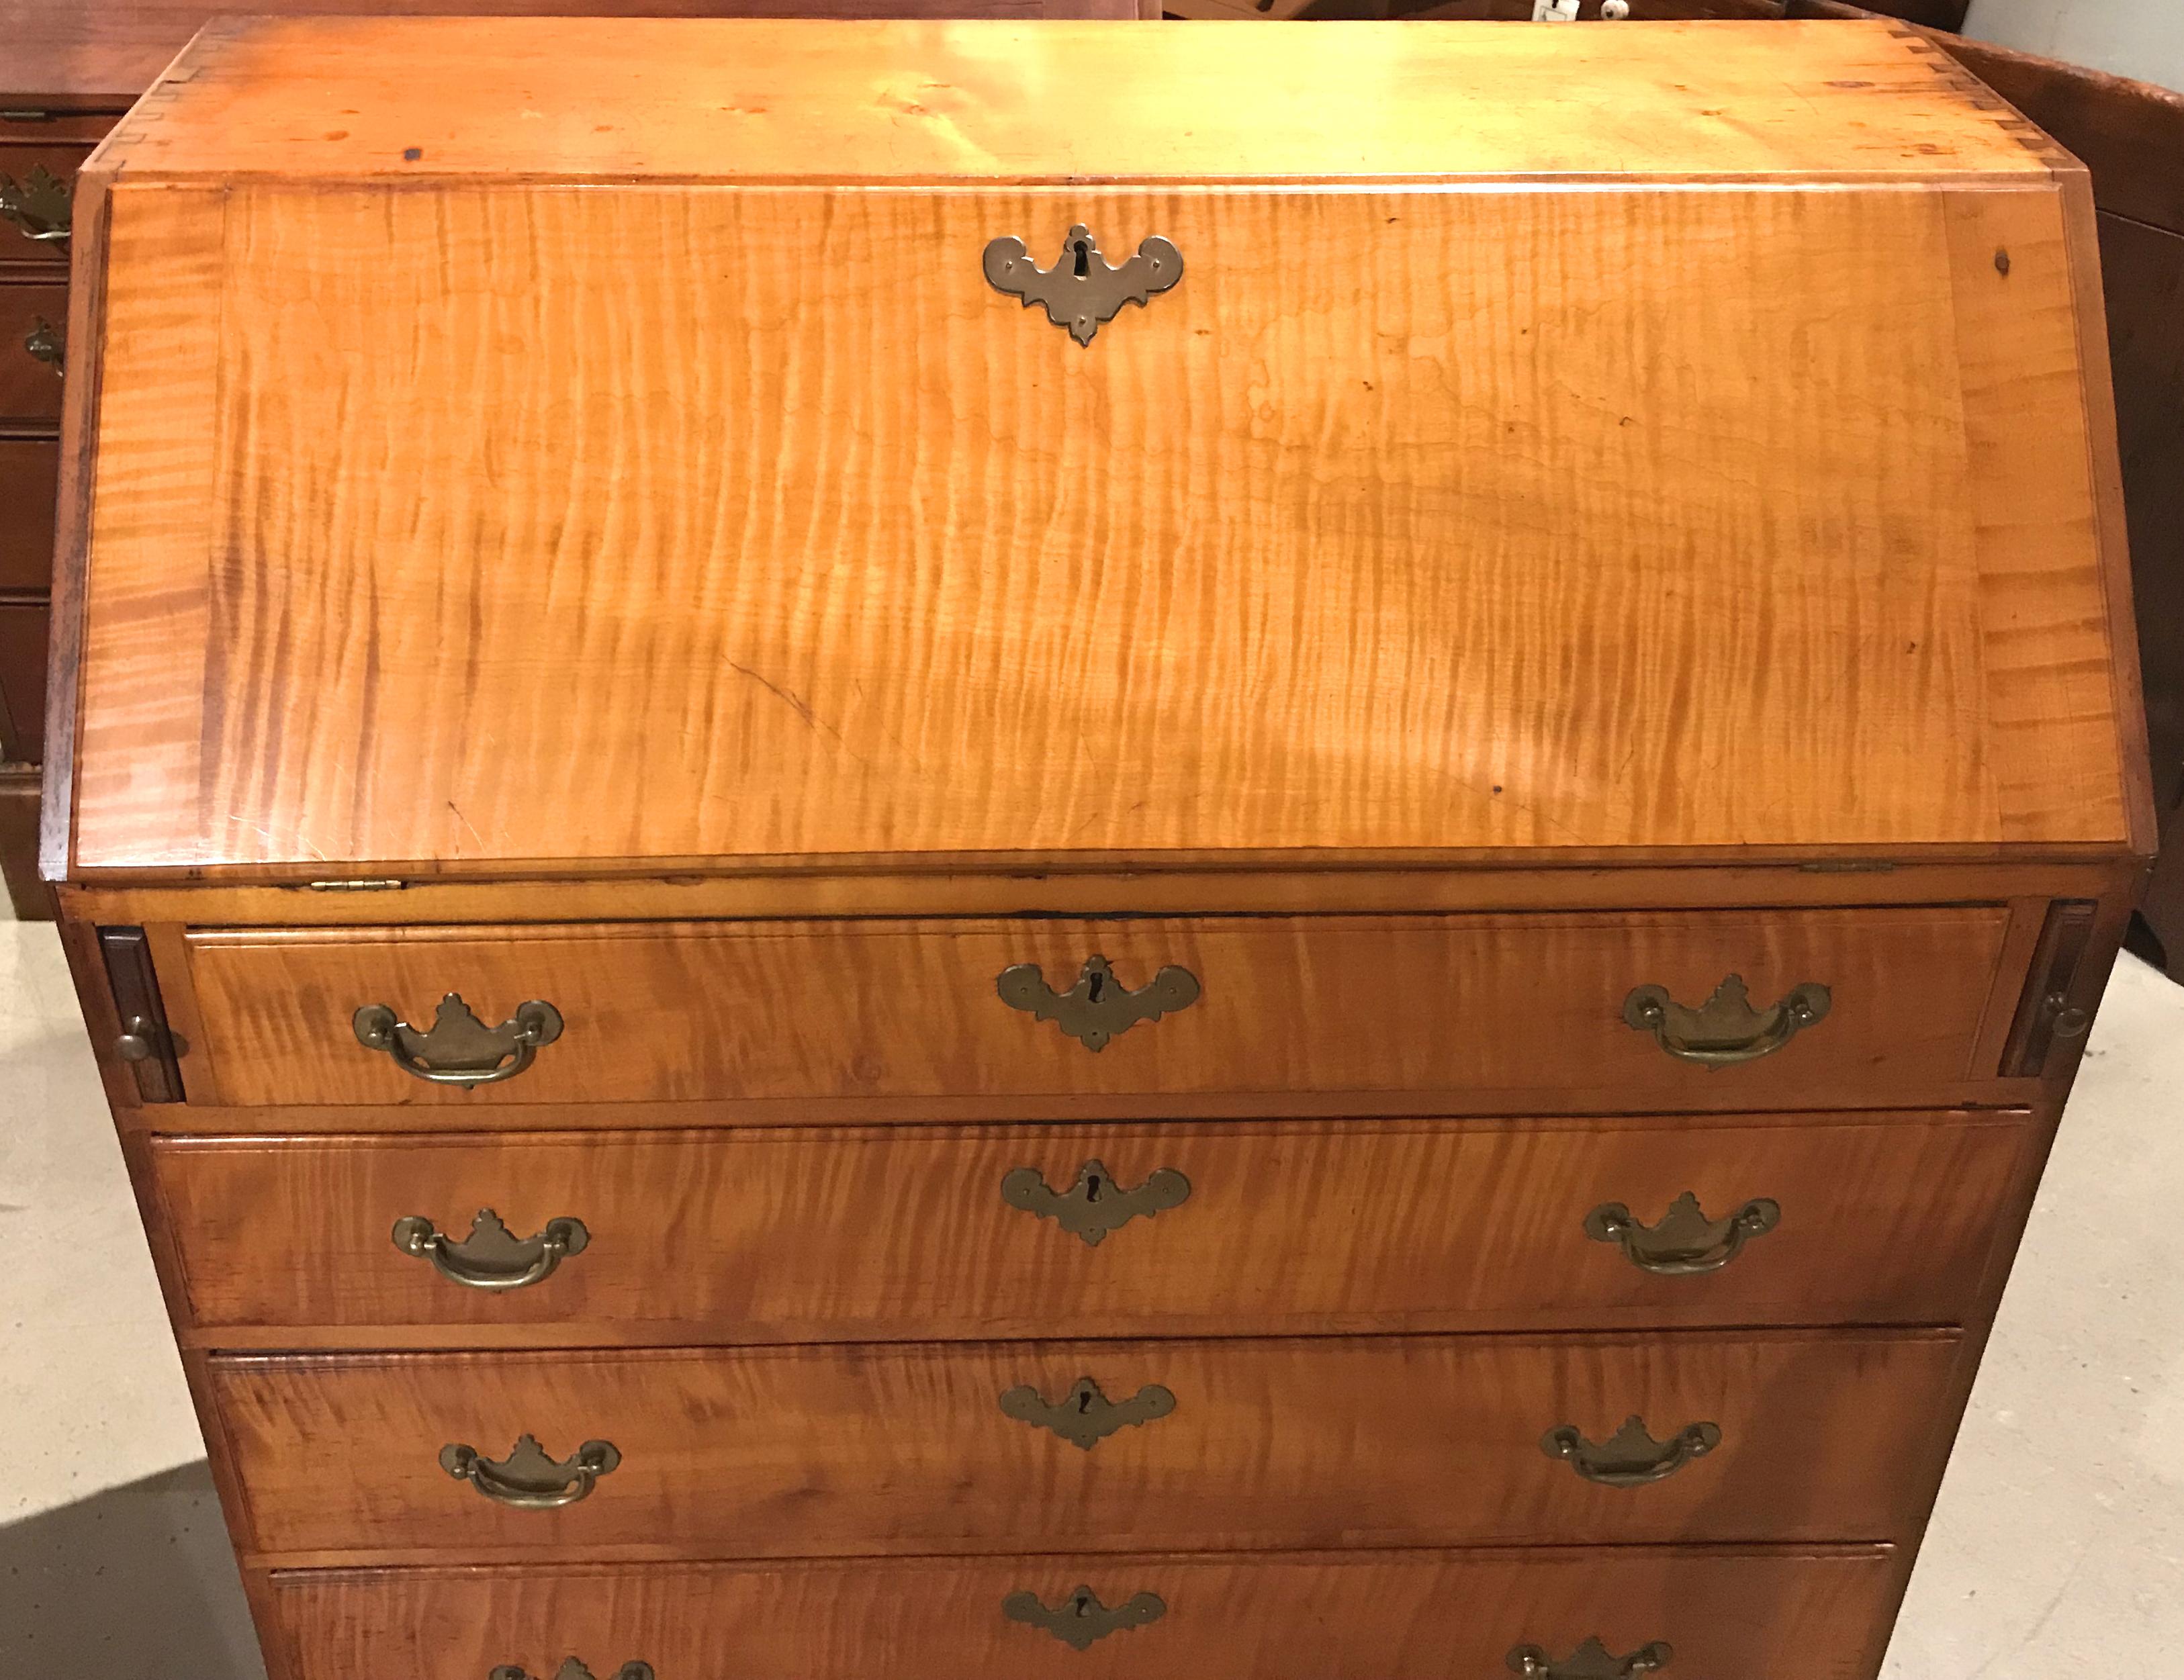 A fine example of a Chippendale style tiger maple slant top or fall front desk with compartmentalized interior, including a centre drawer with pinwheel carving, flanked by three balanced cubbies on each side over three fitted drawers. The lower case